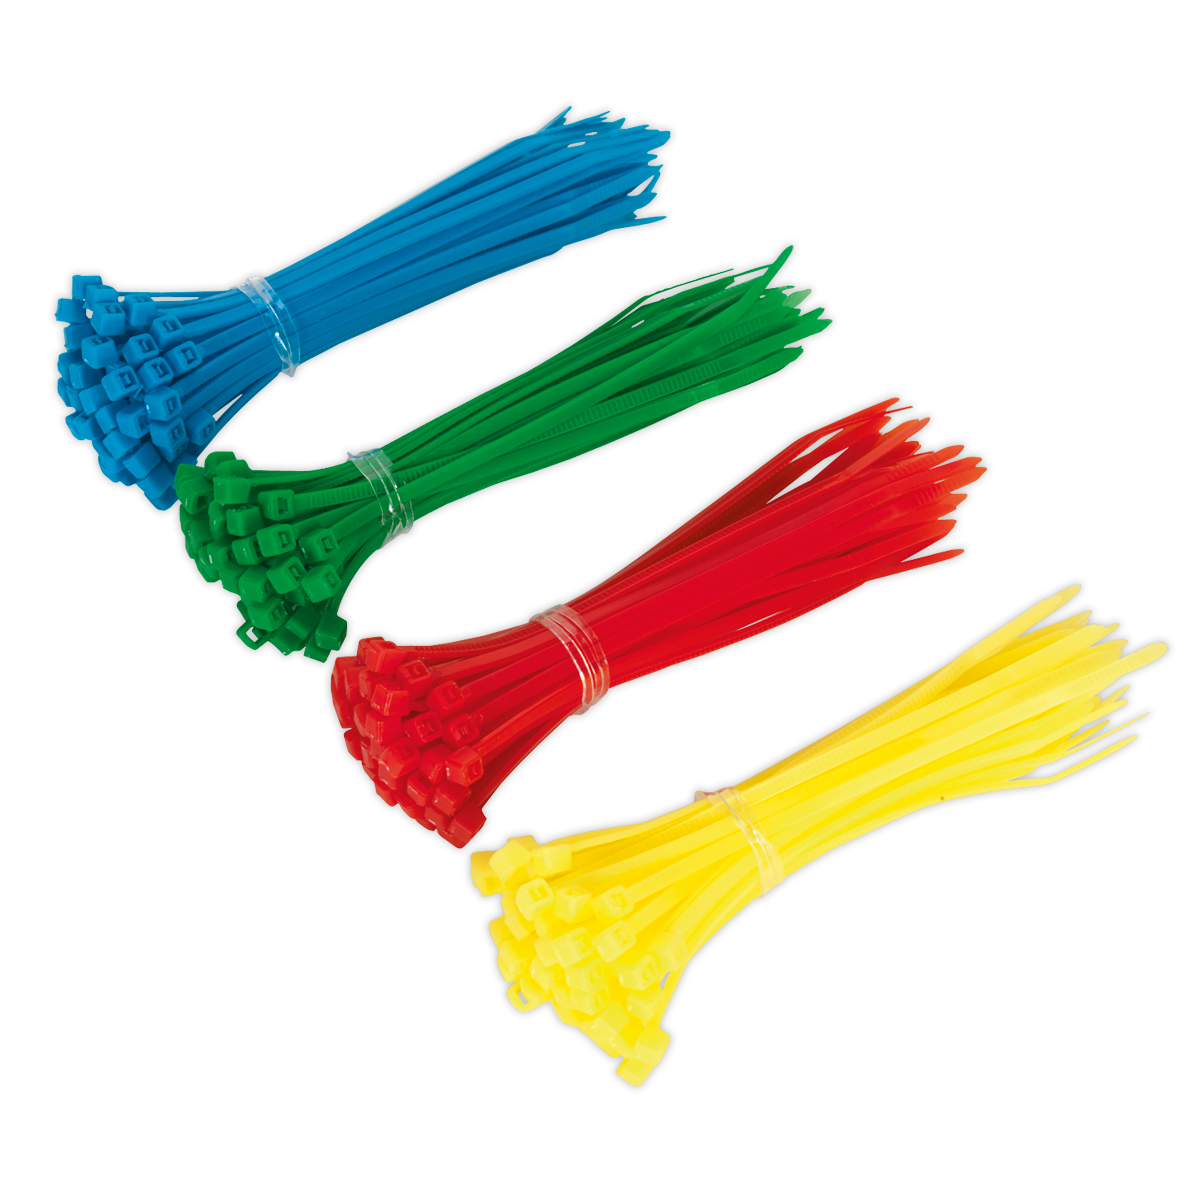 Sealey Cable Tie Assortment 100 x 2.5mm Pack of 200